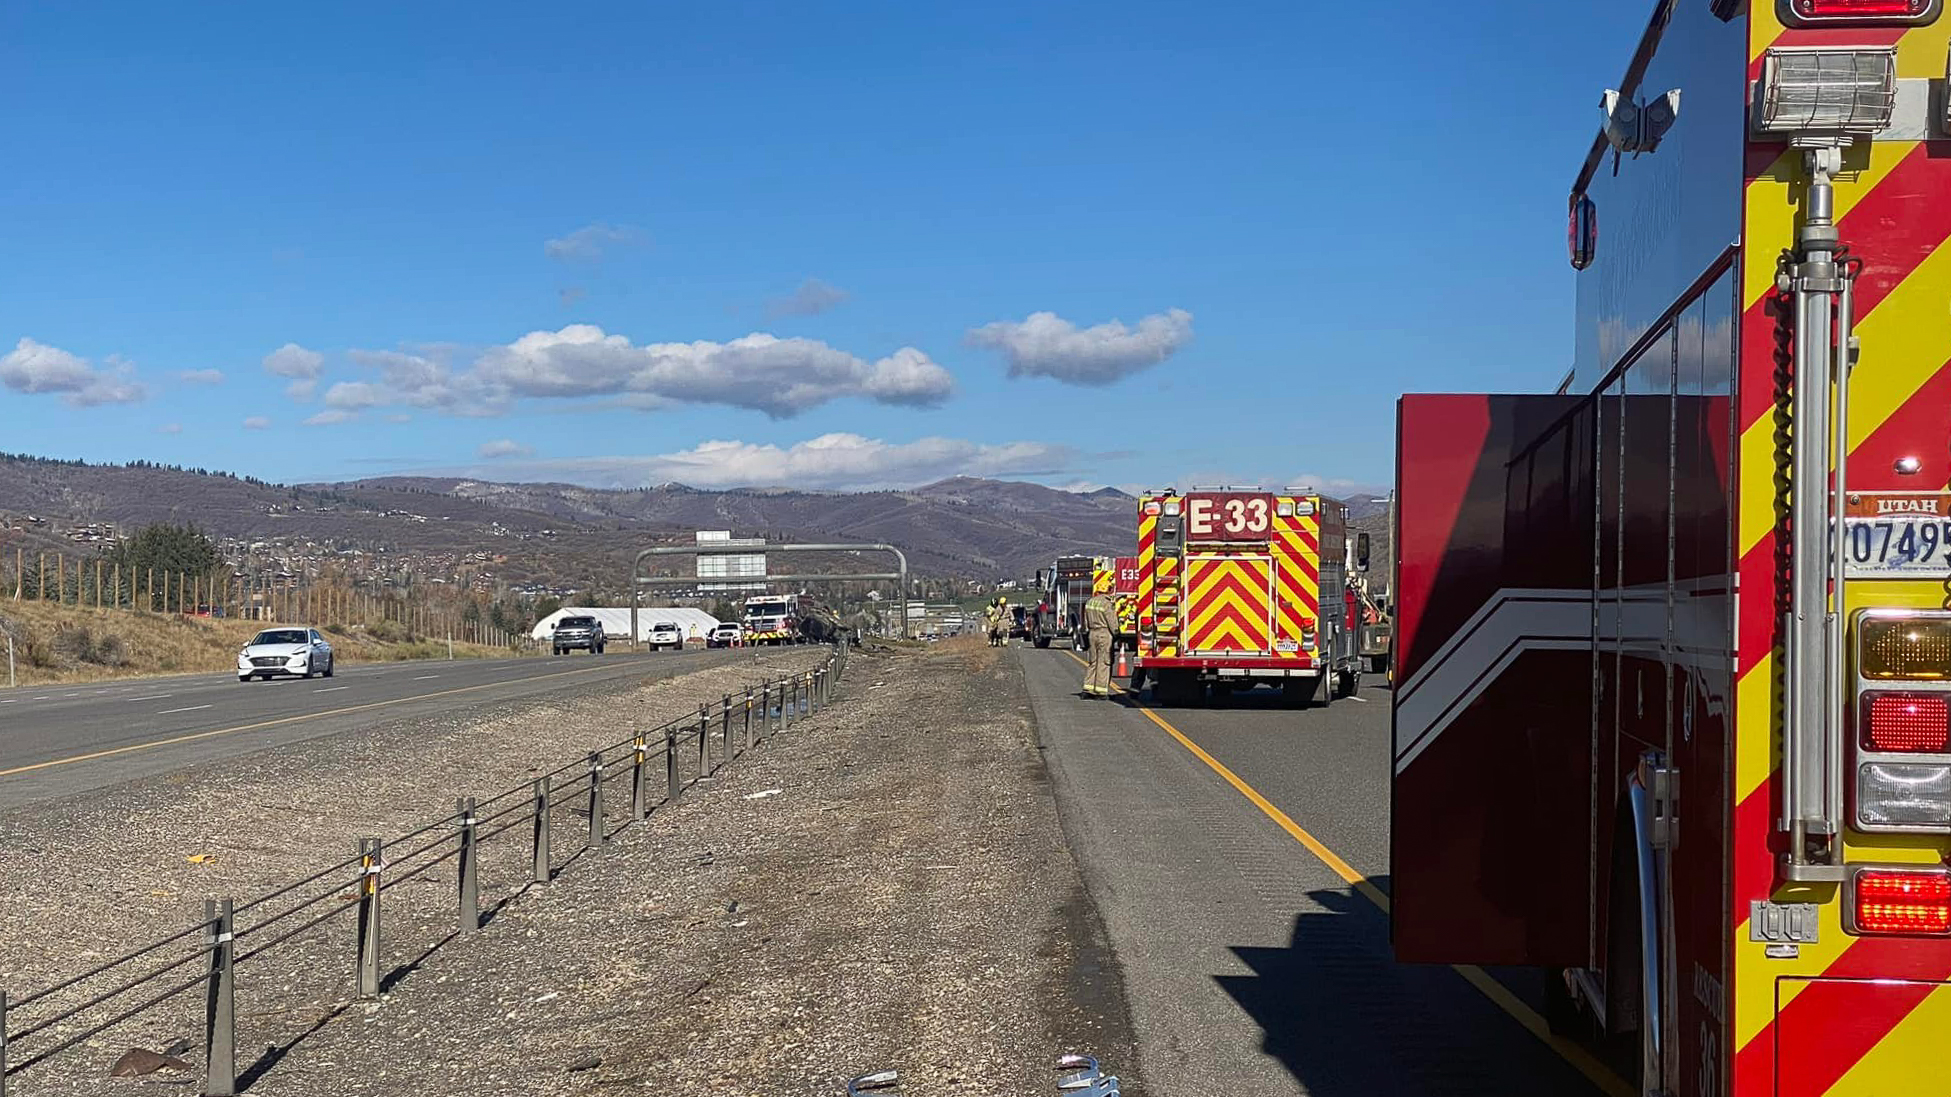 Park City Fire Department and Utah Highway Patrol responded to a rollover crash on I-80. UDOT is lo...